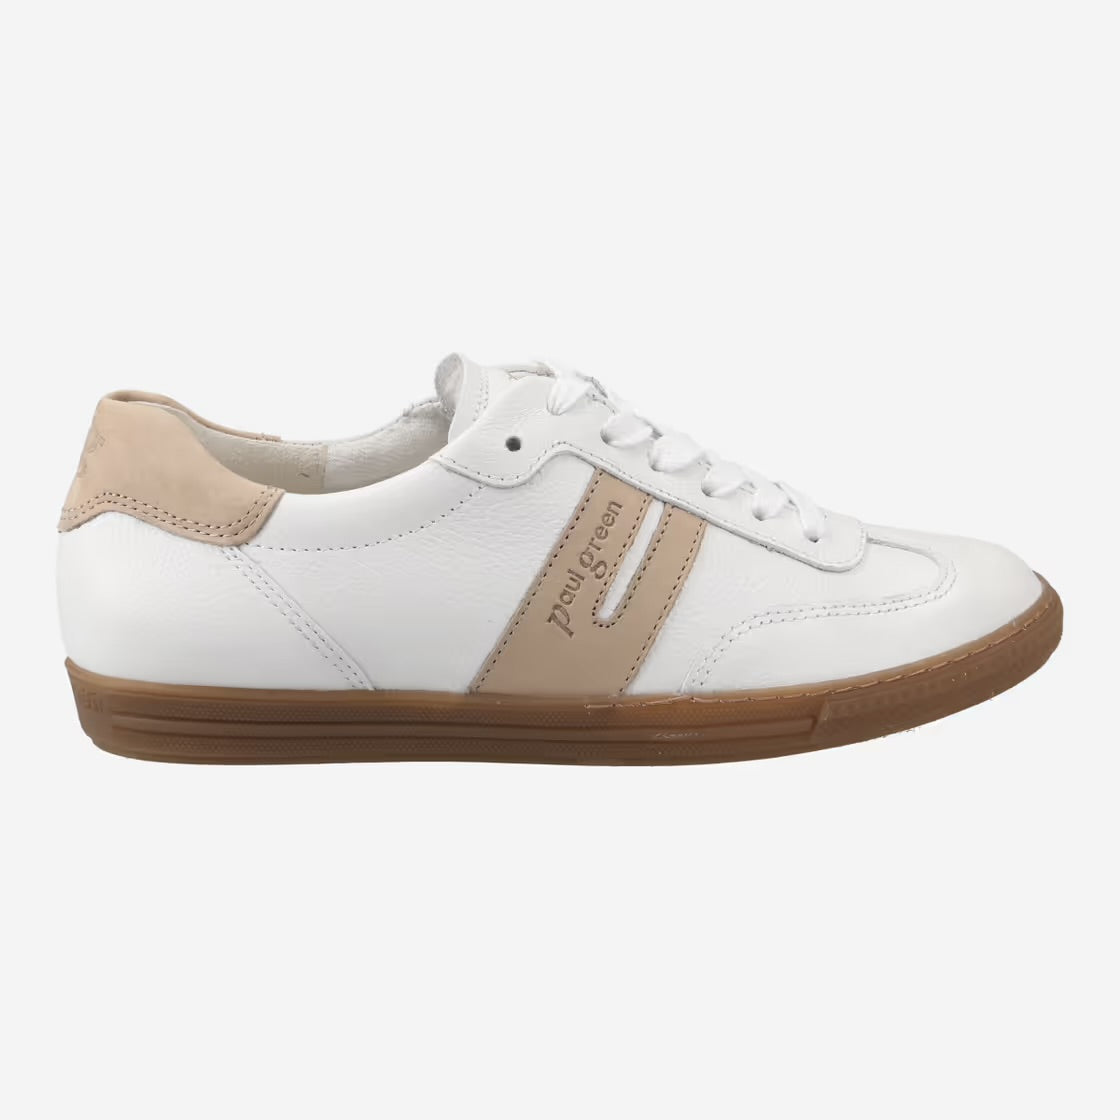 Paul Green - 5350 White and Beige Trainer [Preorder for last week of March]